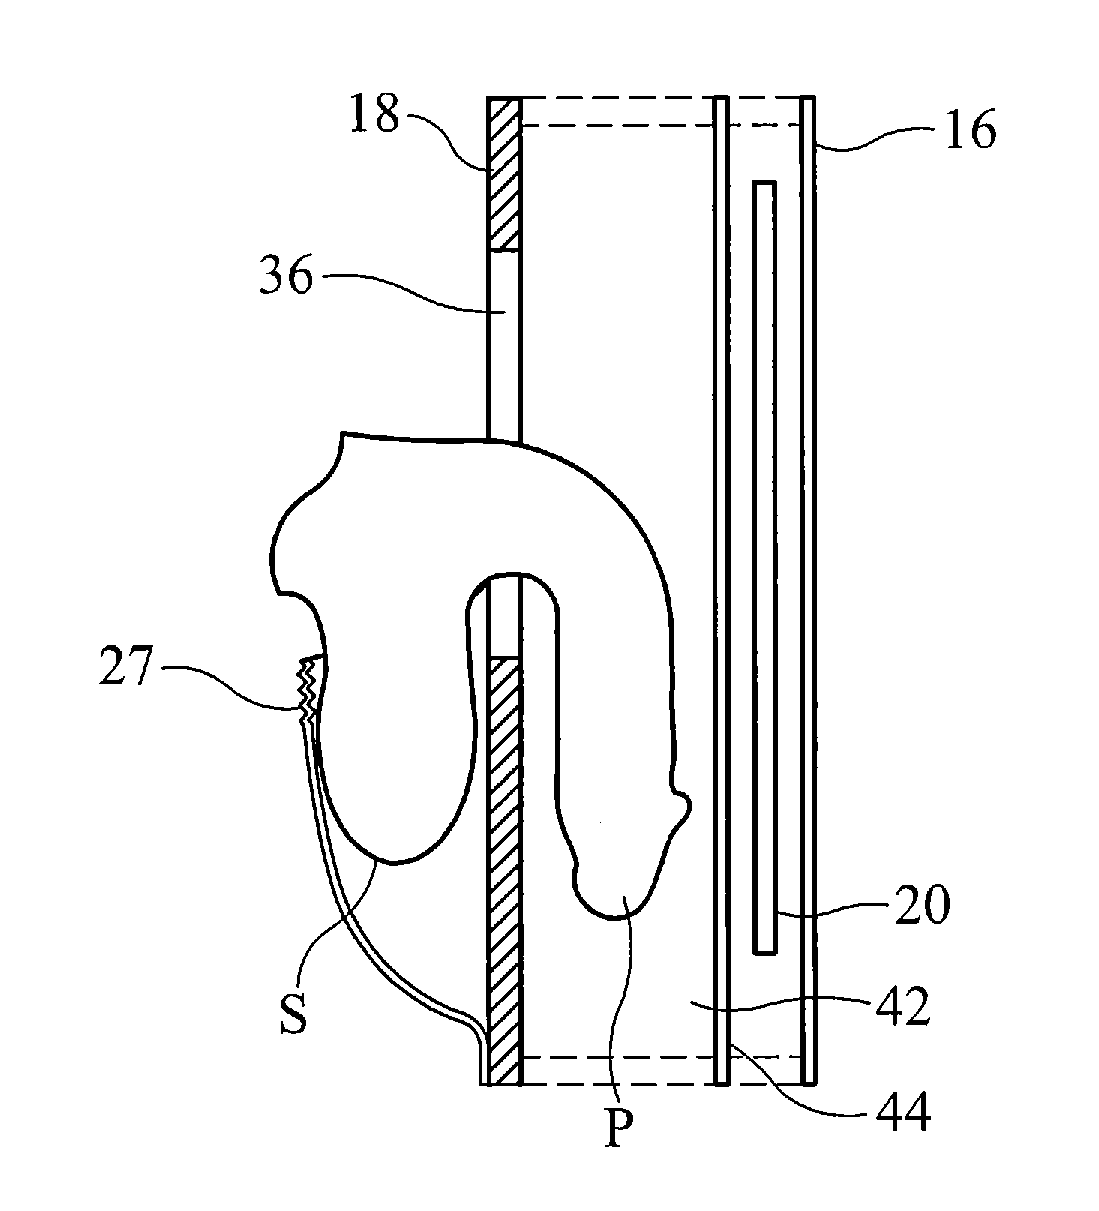 Incontinence device for ambulatory males